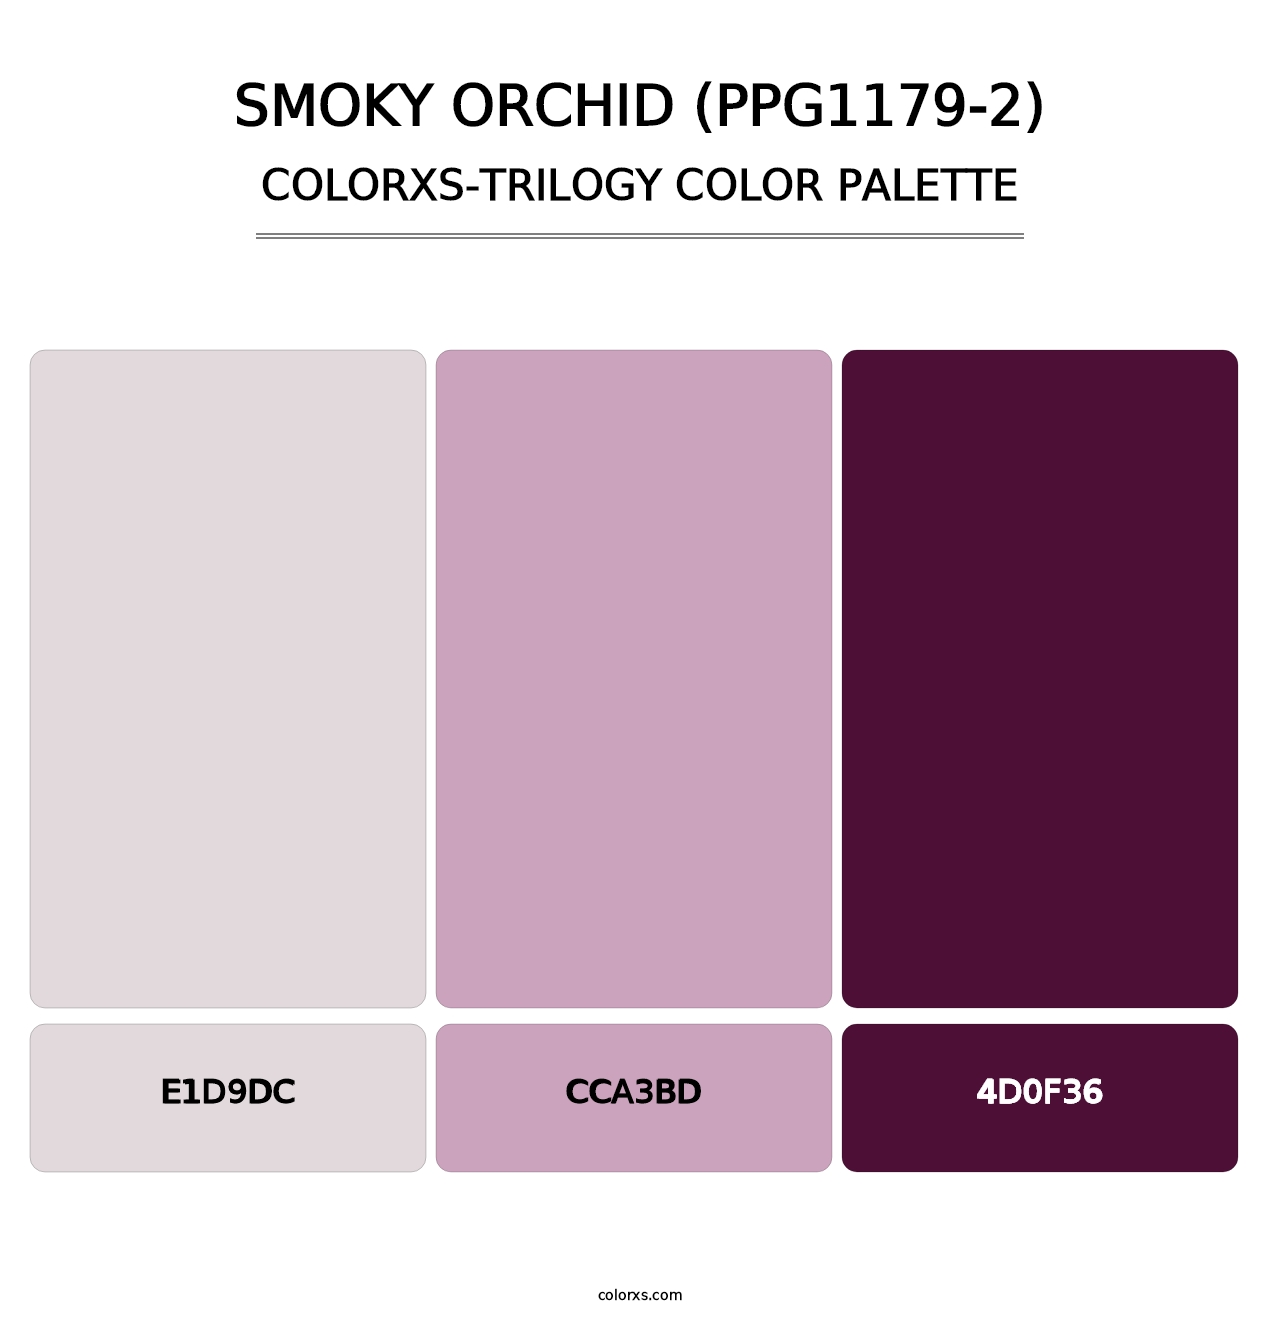 Smoky Orchid (PPG1179-2) - Colorxs Trilogy Palette